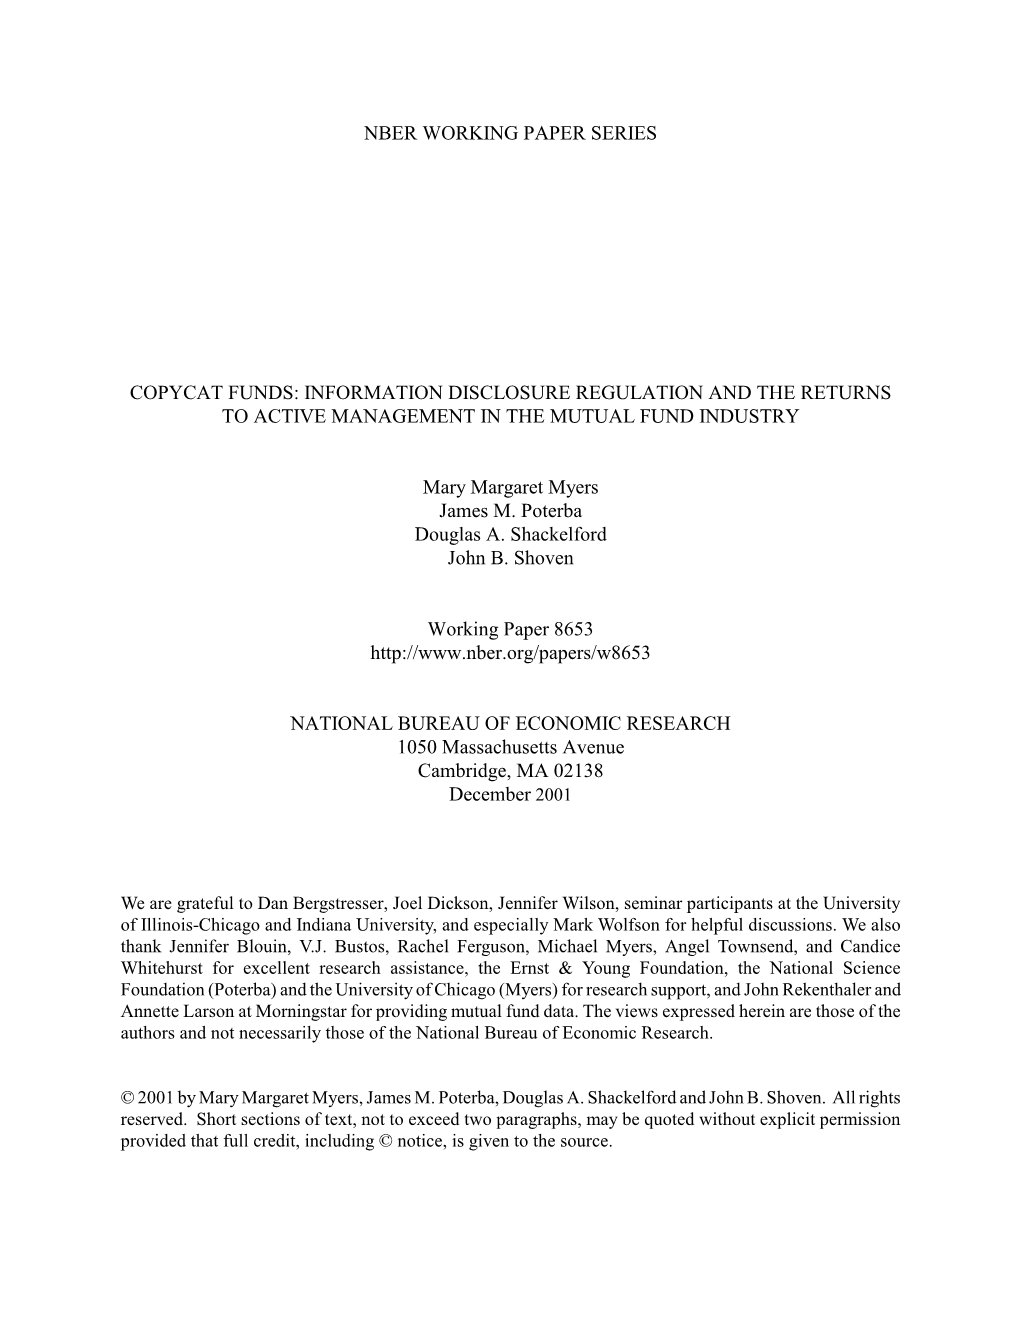 Nber Working Paper Series Copycat Funds: Information Disclosure Regulation and the Returns to Active Management in the Mutual Fu